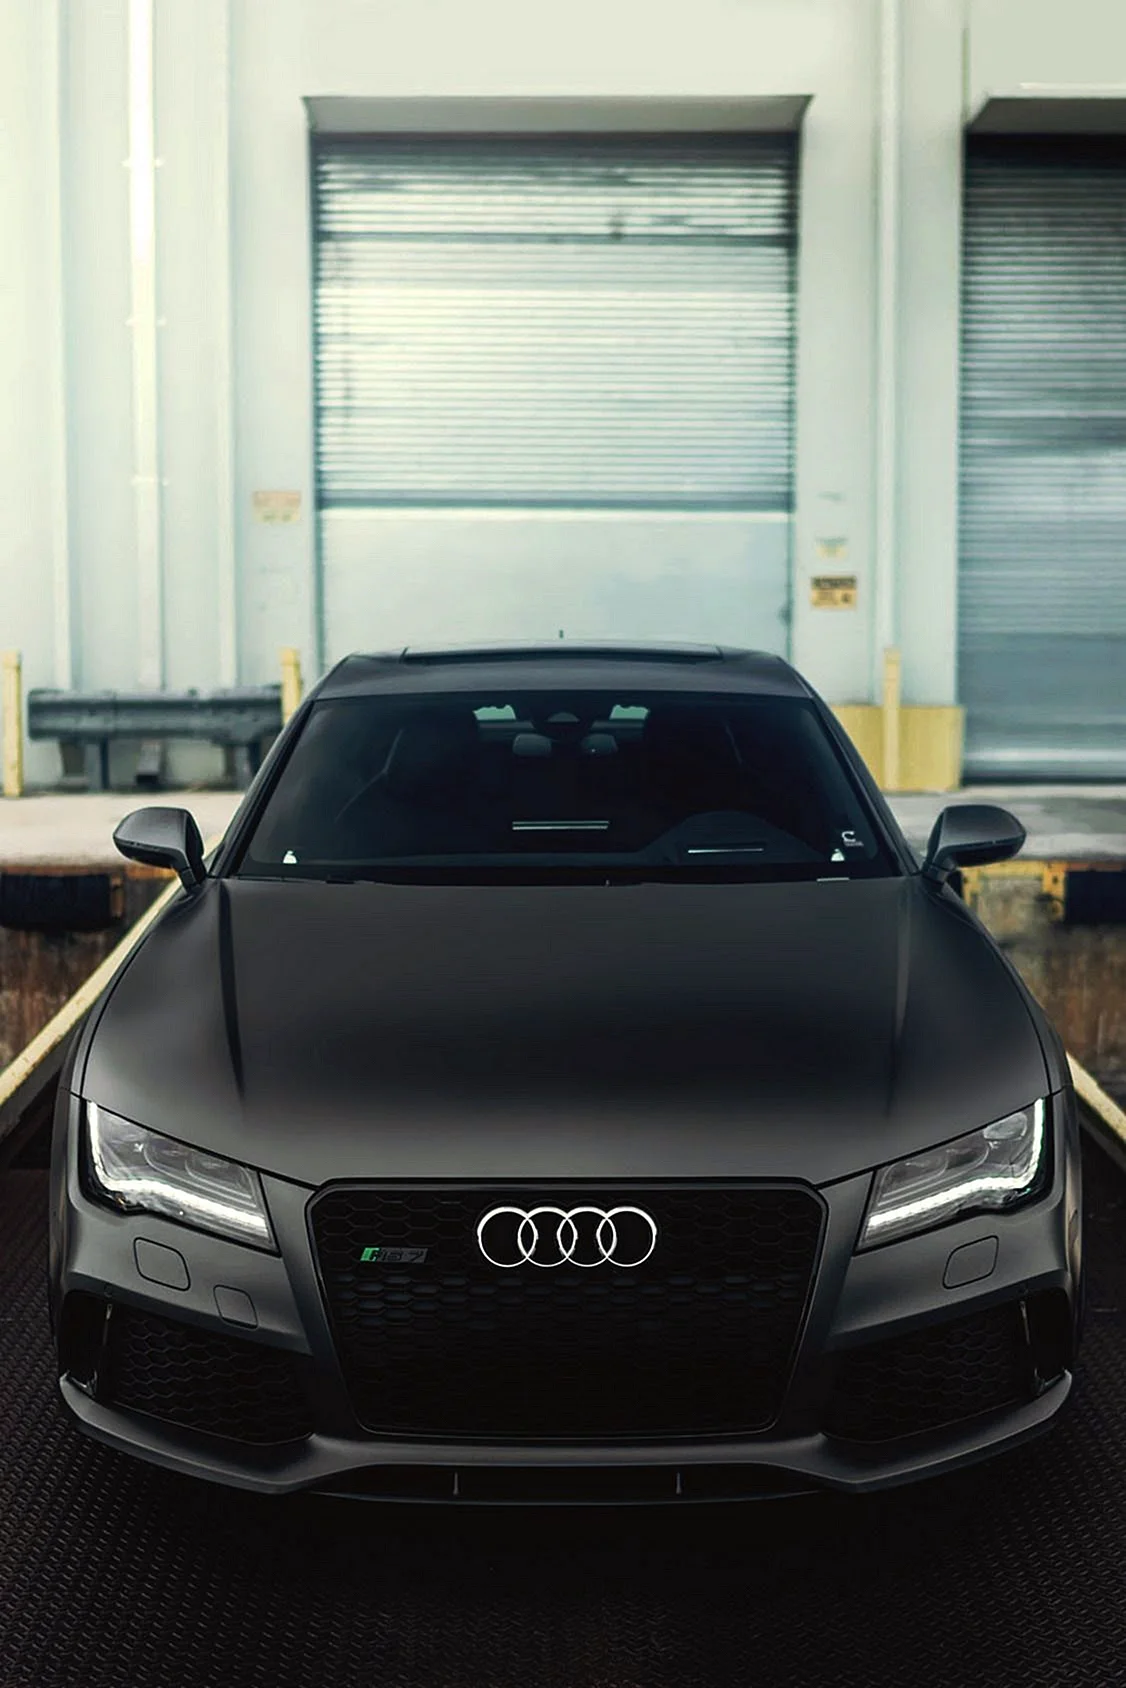 Audi A7 Gary Wallpaper For iPhone